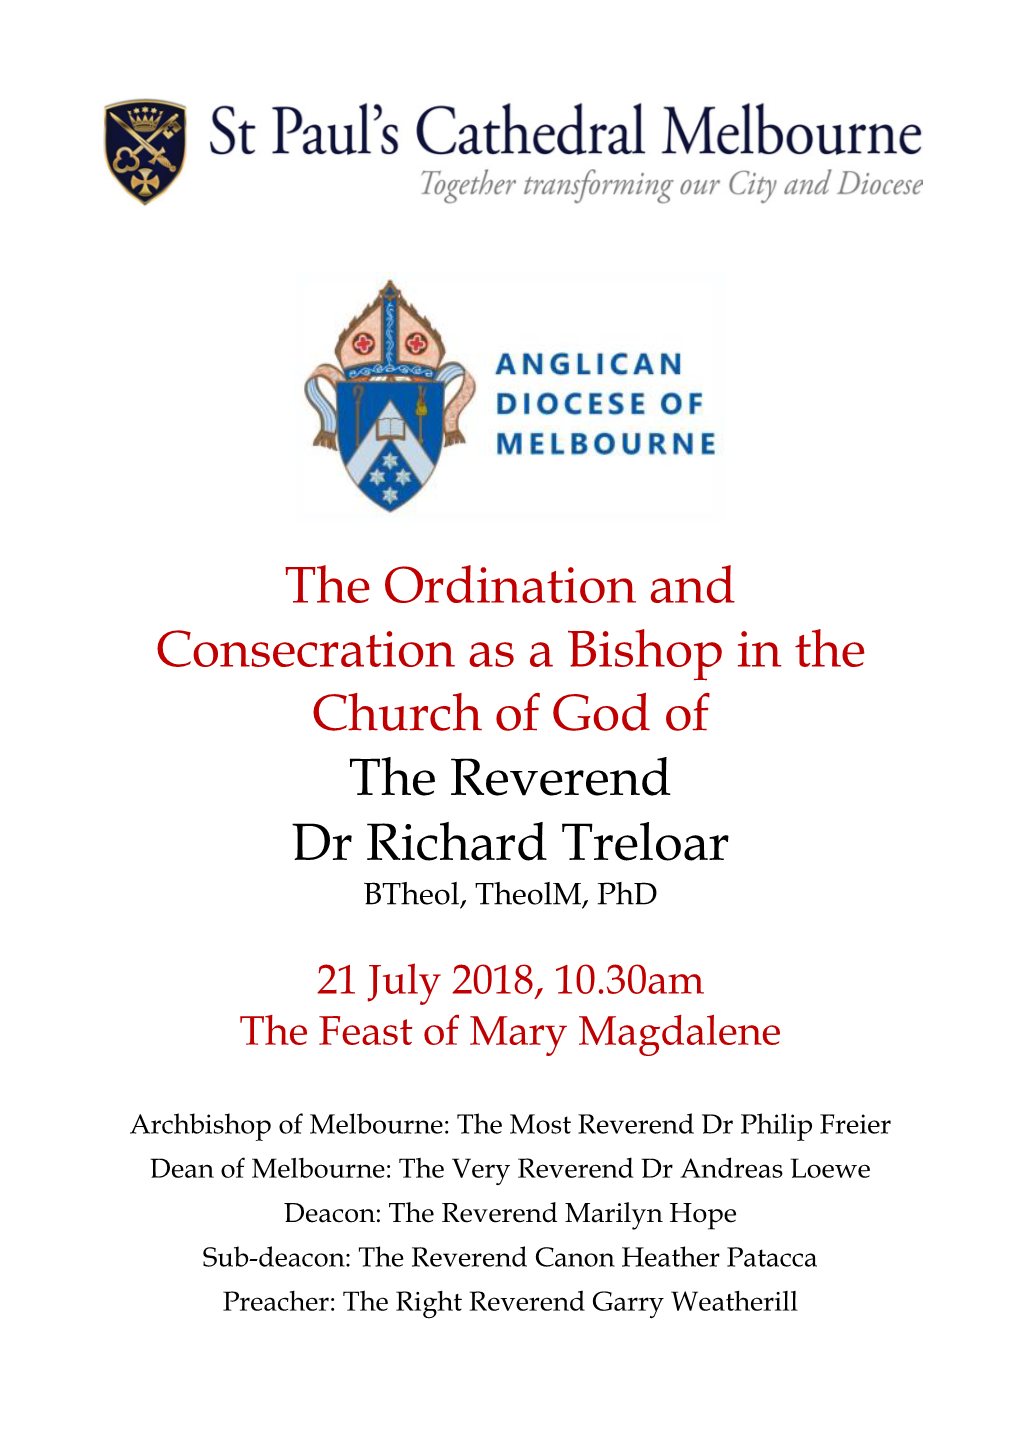 The Ordination and Consecration As a Bishop in the Church of God of the Reverend Dr Richard Treloar Btheol, Theolm, Phd